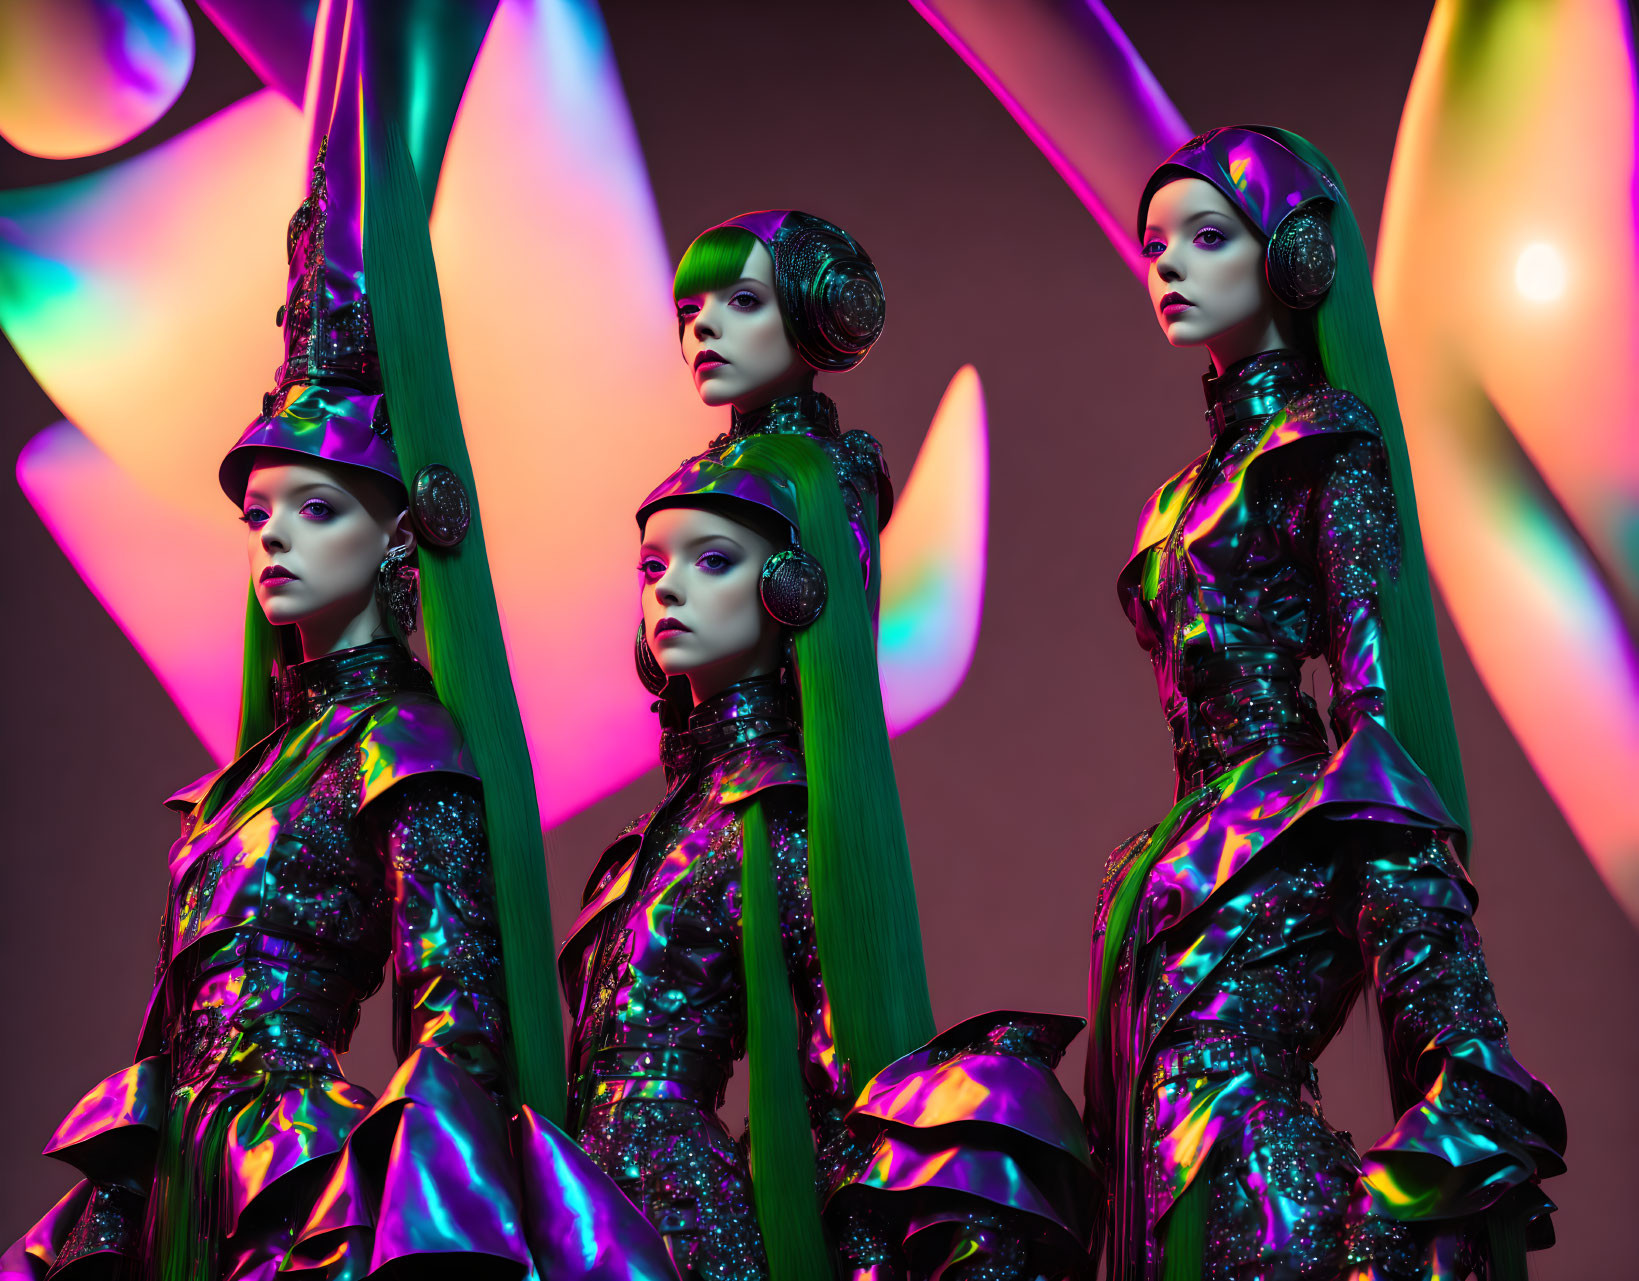 Four models in metallic green outfits with unique hats and accessories on vibrant backdrop